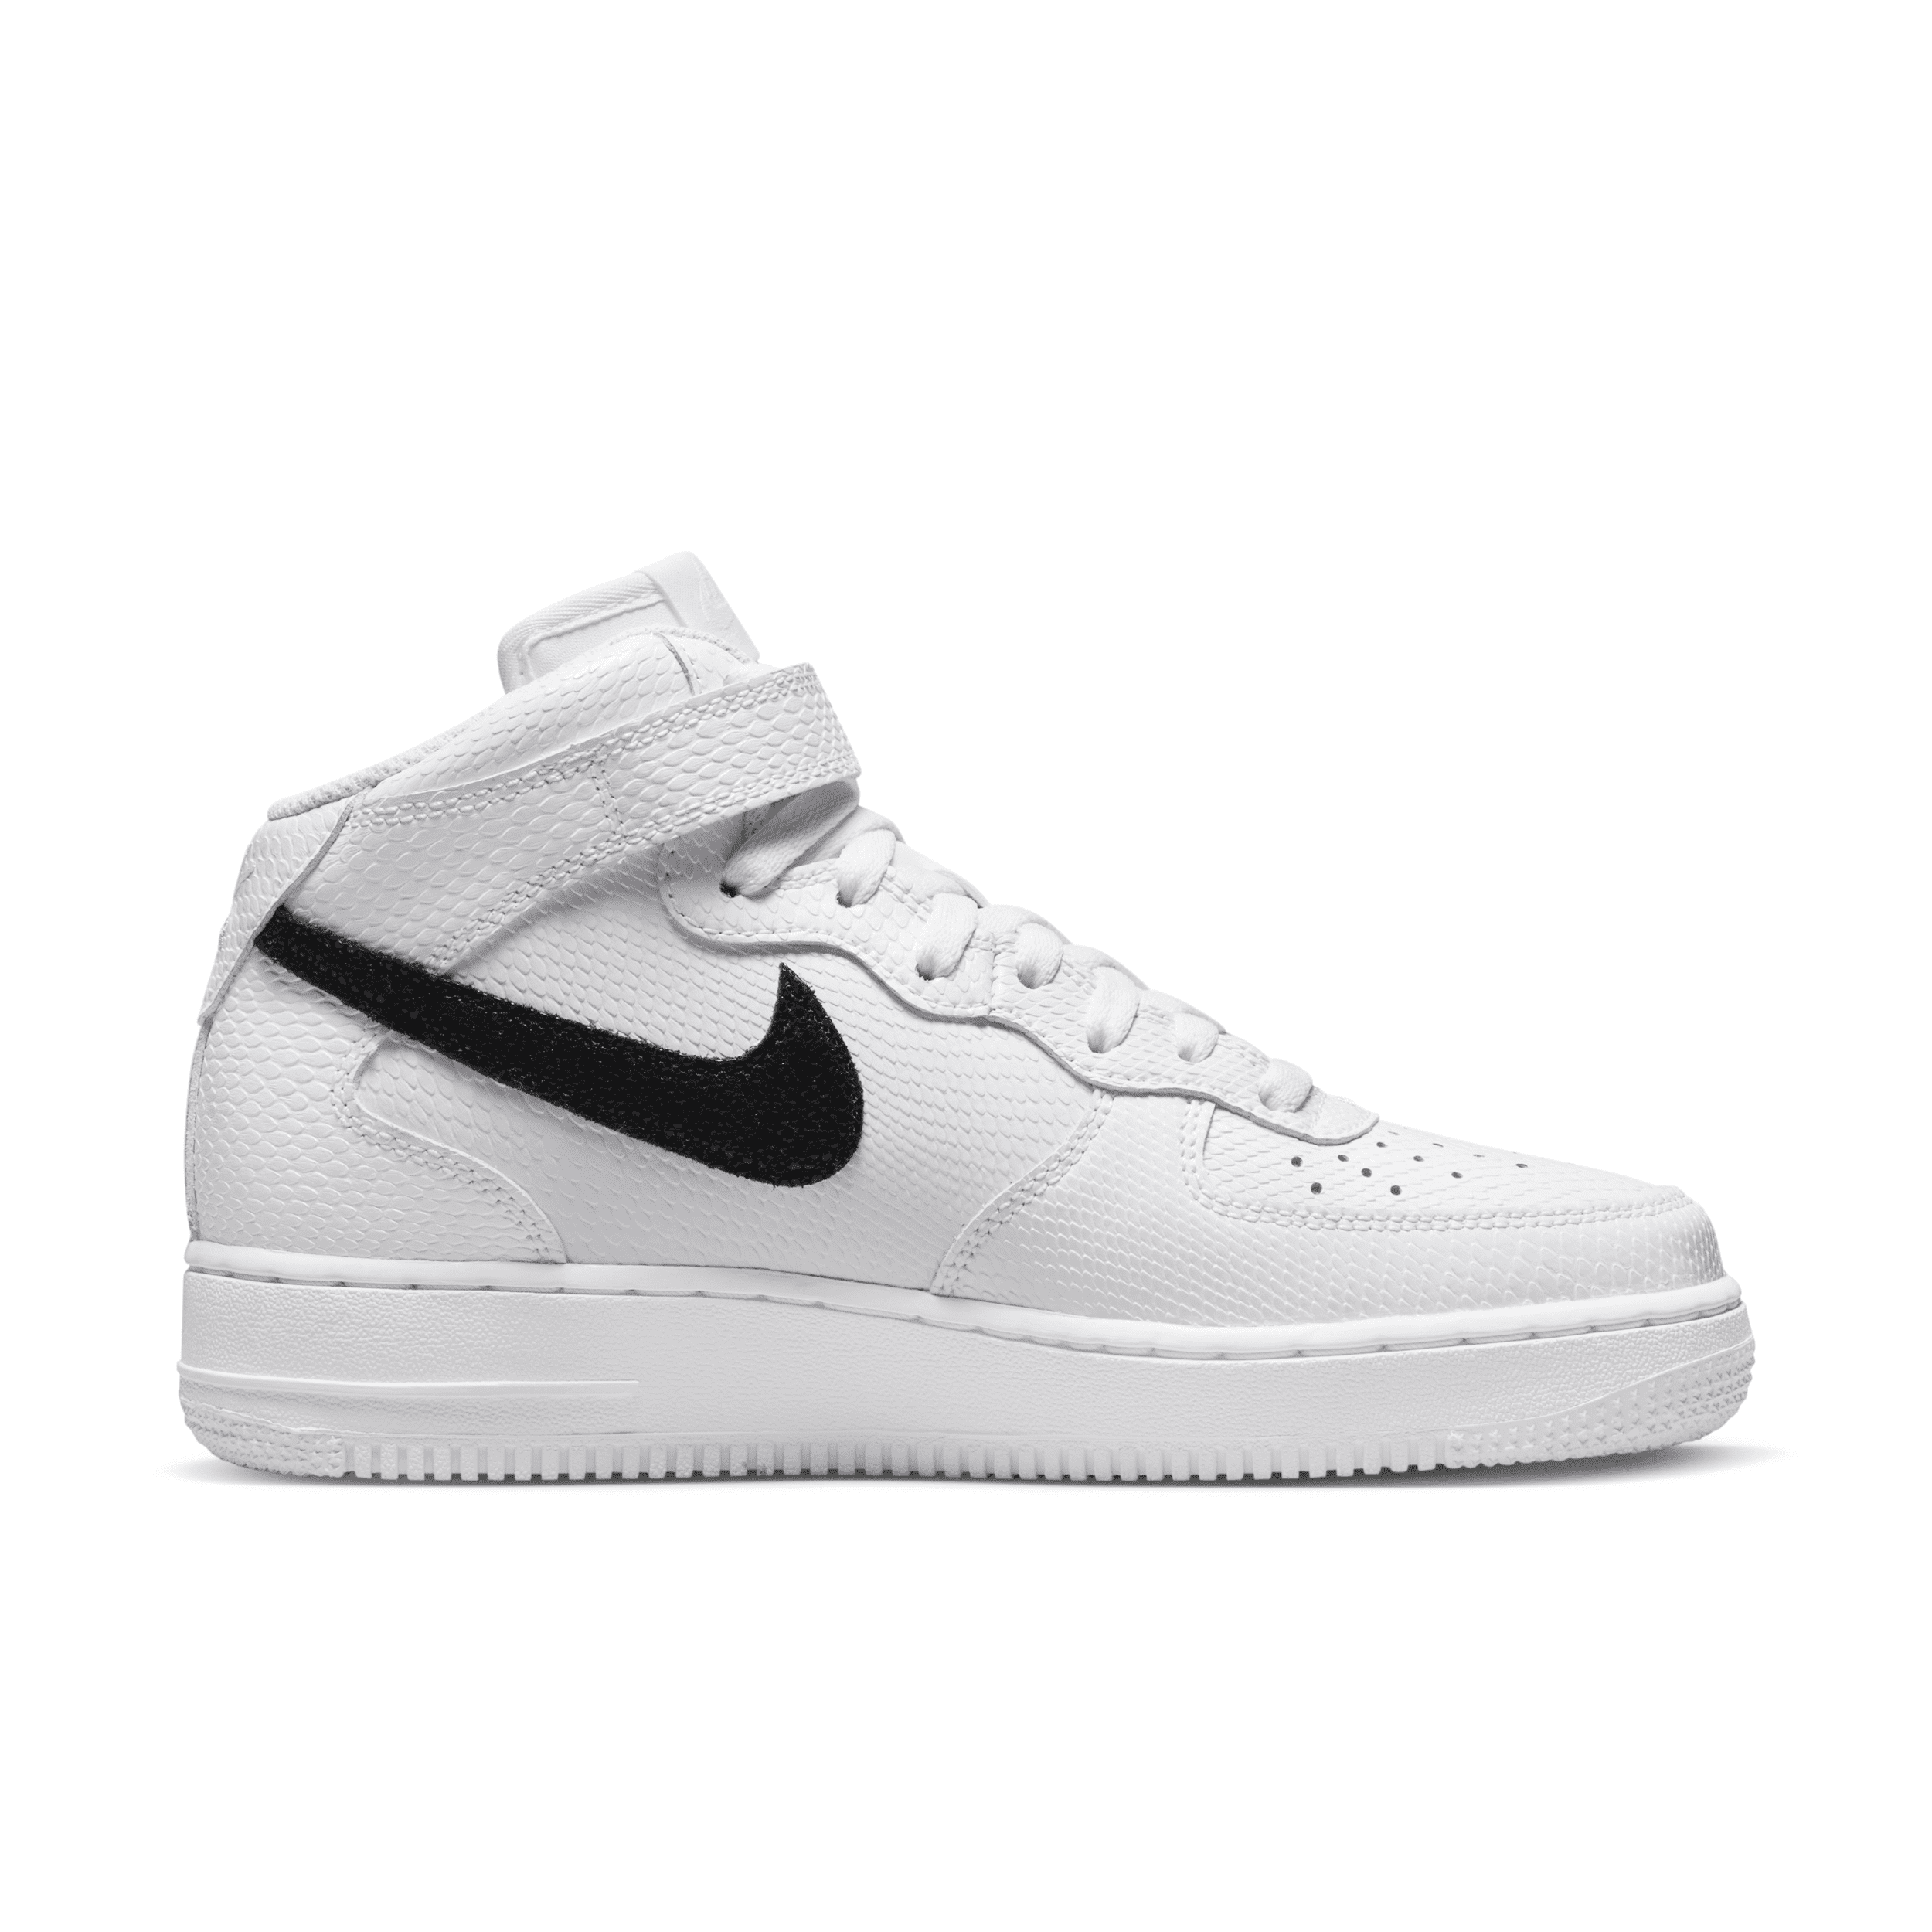 10 Easy Ways To Style Nike Air Force 1 This Summer – Love Style